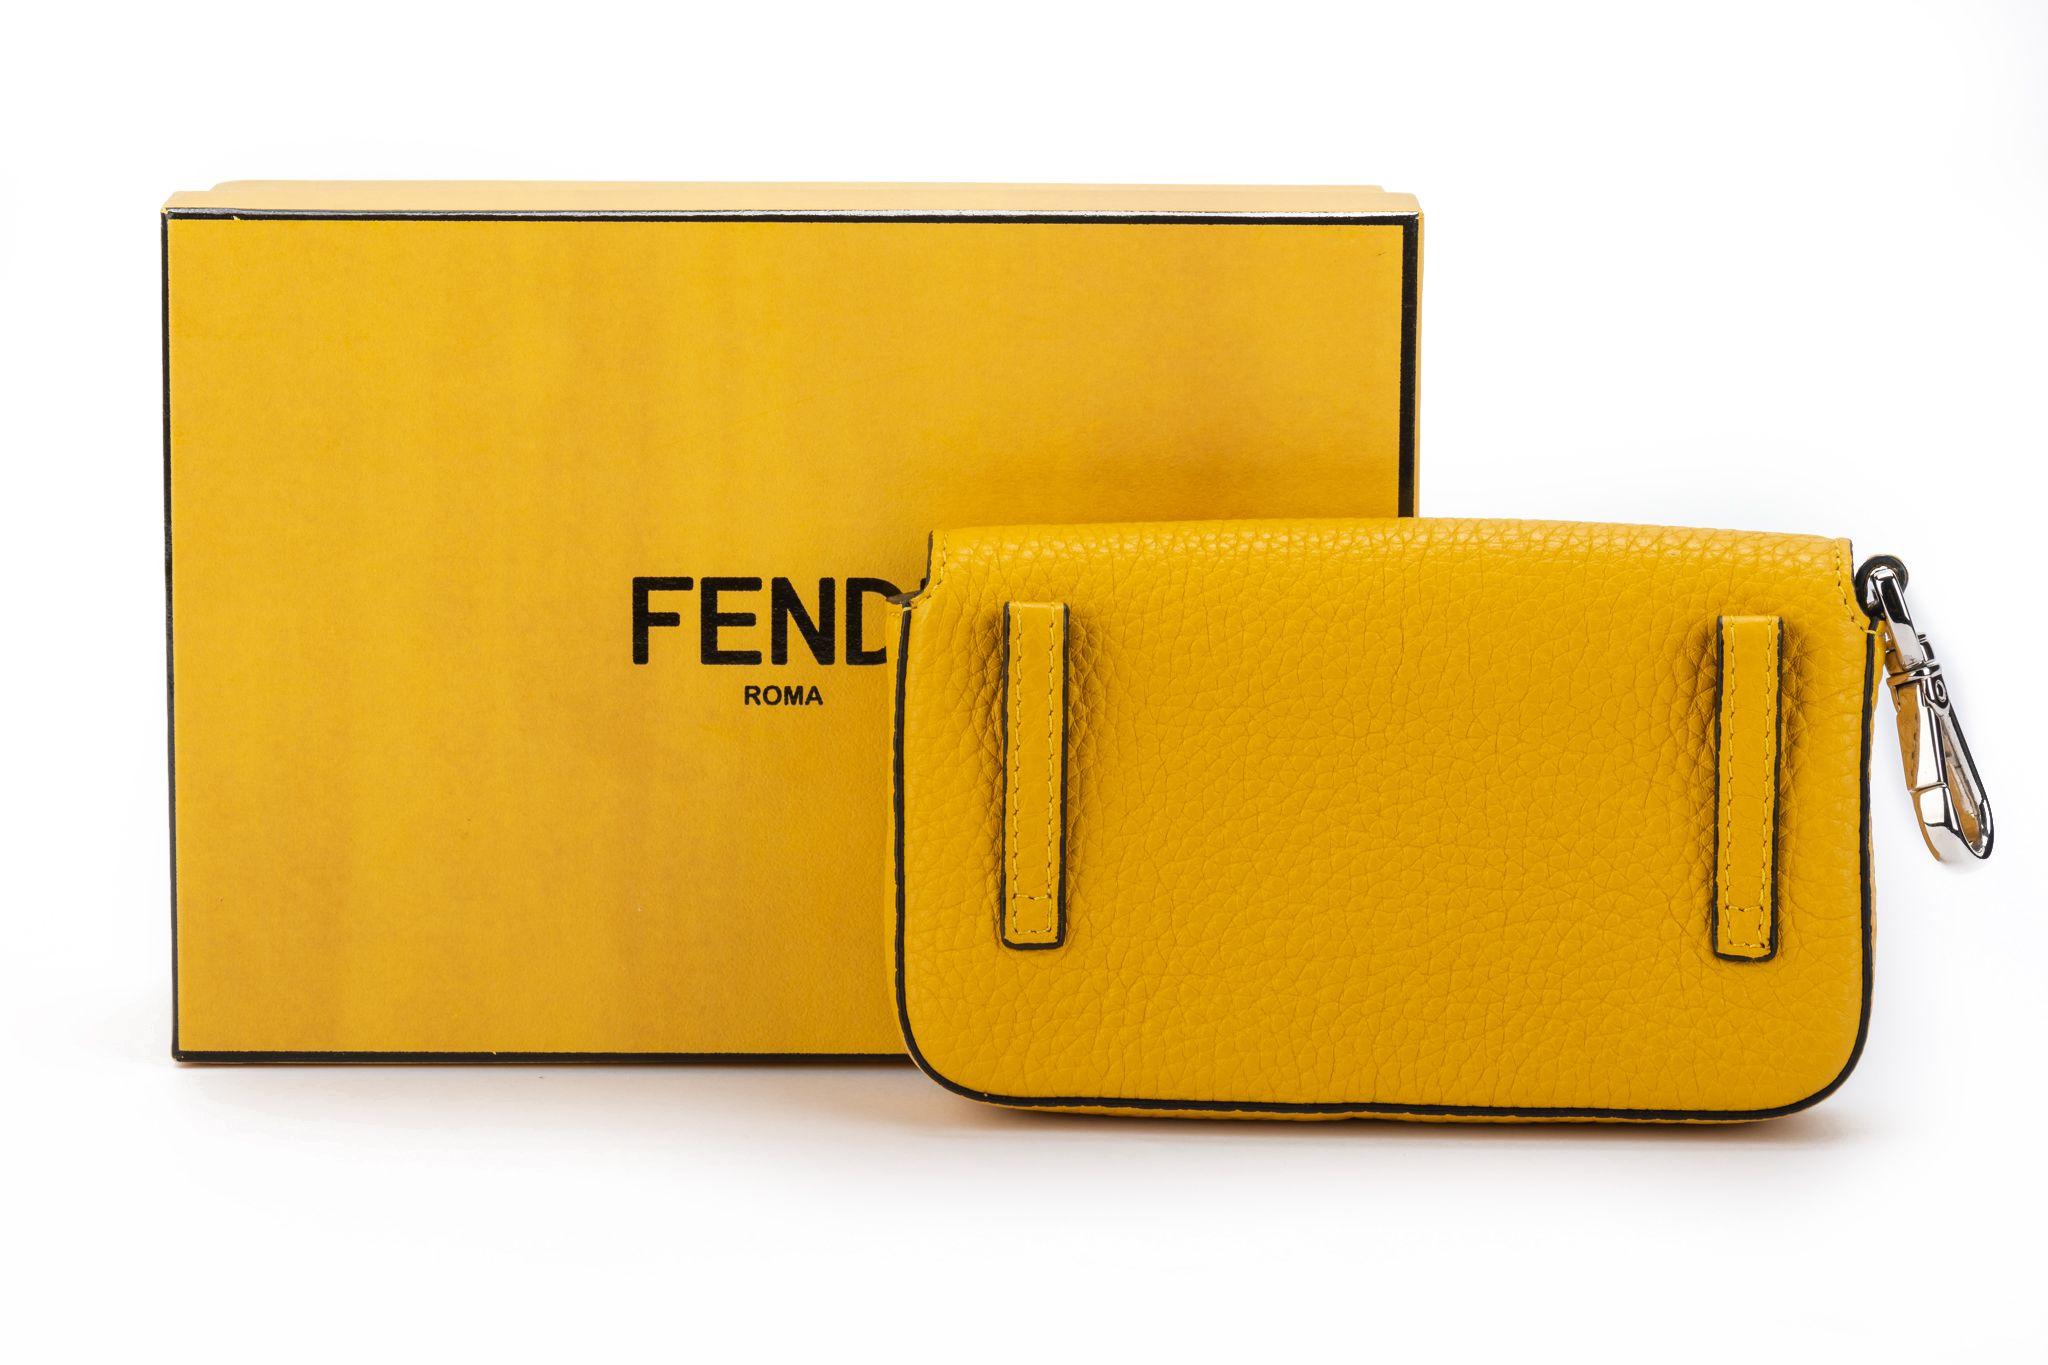 Fendi new yellow leather micro baguette with black interior and palladium hardware. Plastic still on hardware.
Box and original dustcover.